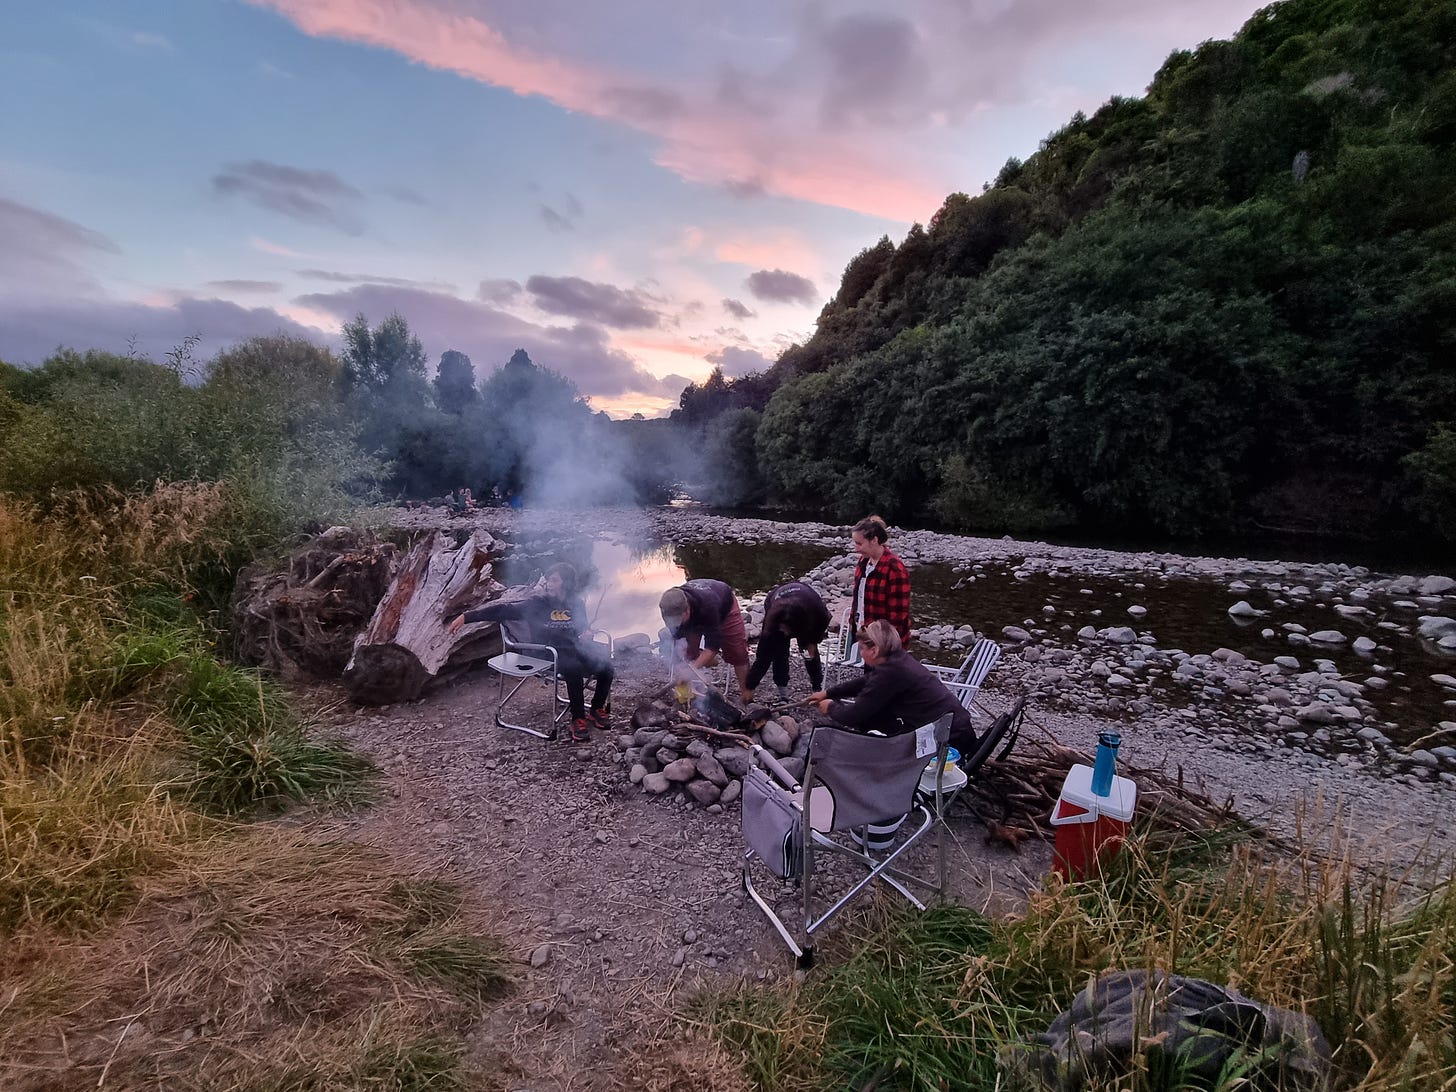 A few people making a fire on a riverbank in the sunset.